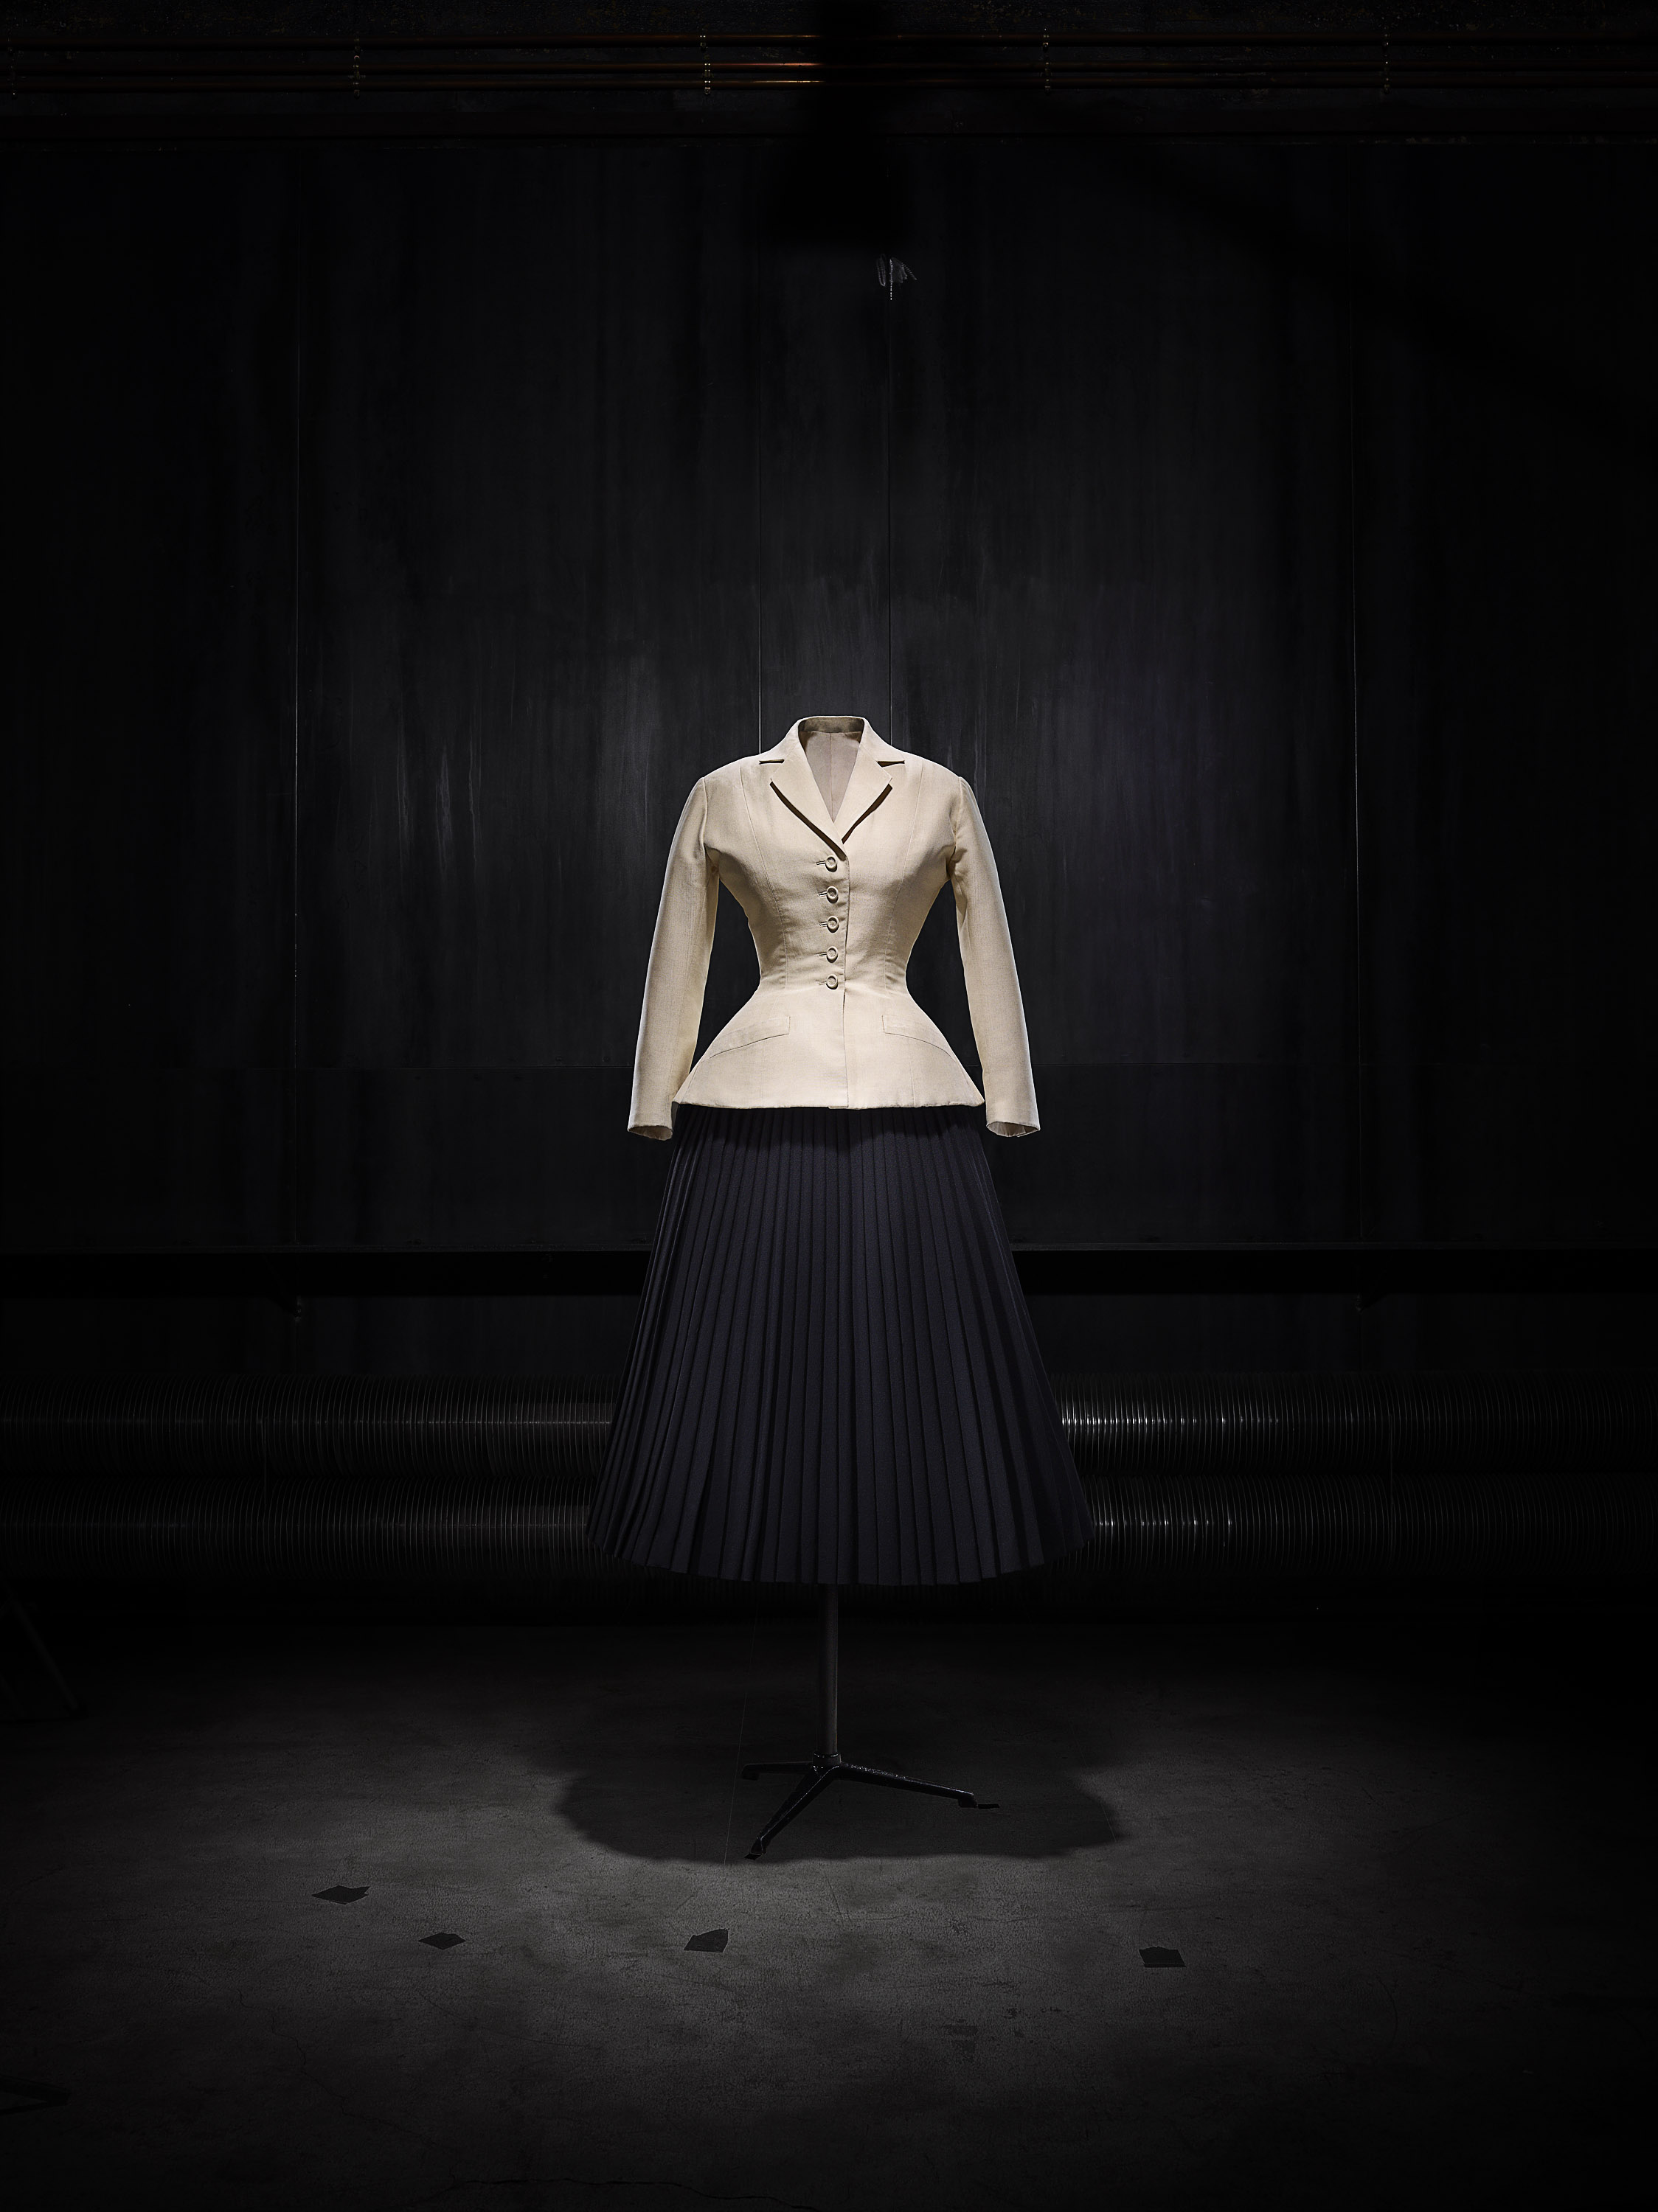 House of Dior: 70 years of Christian Dior collections – in